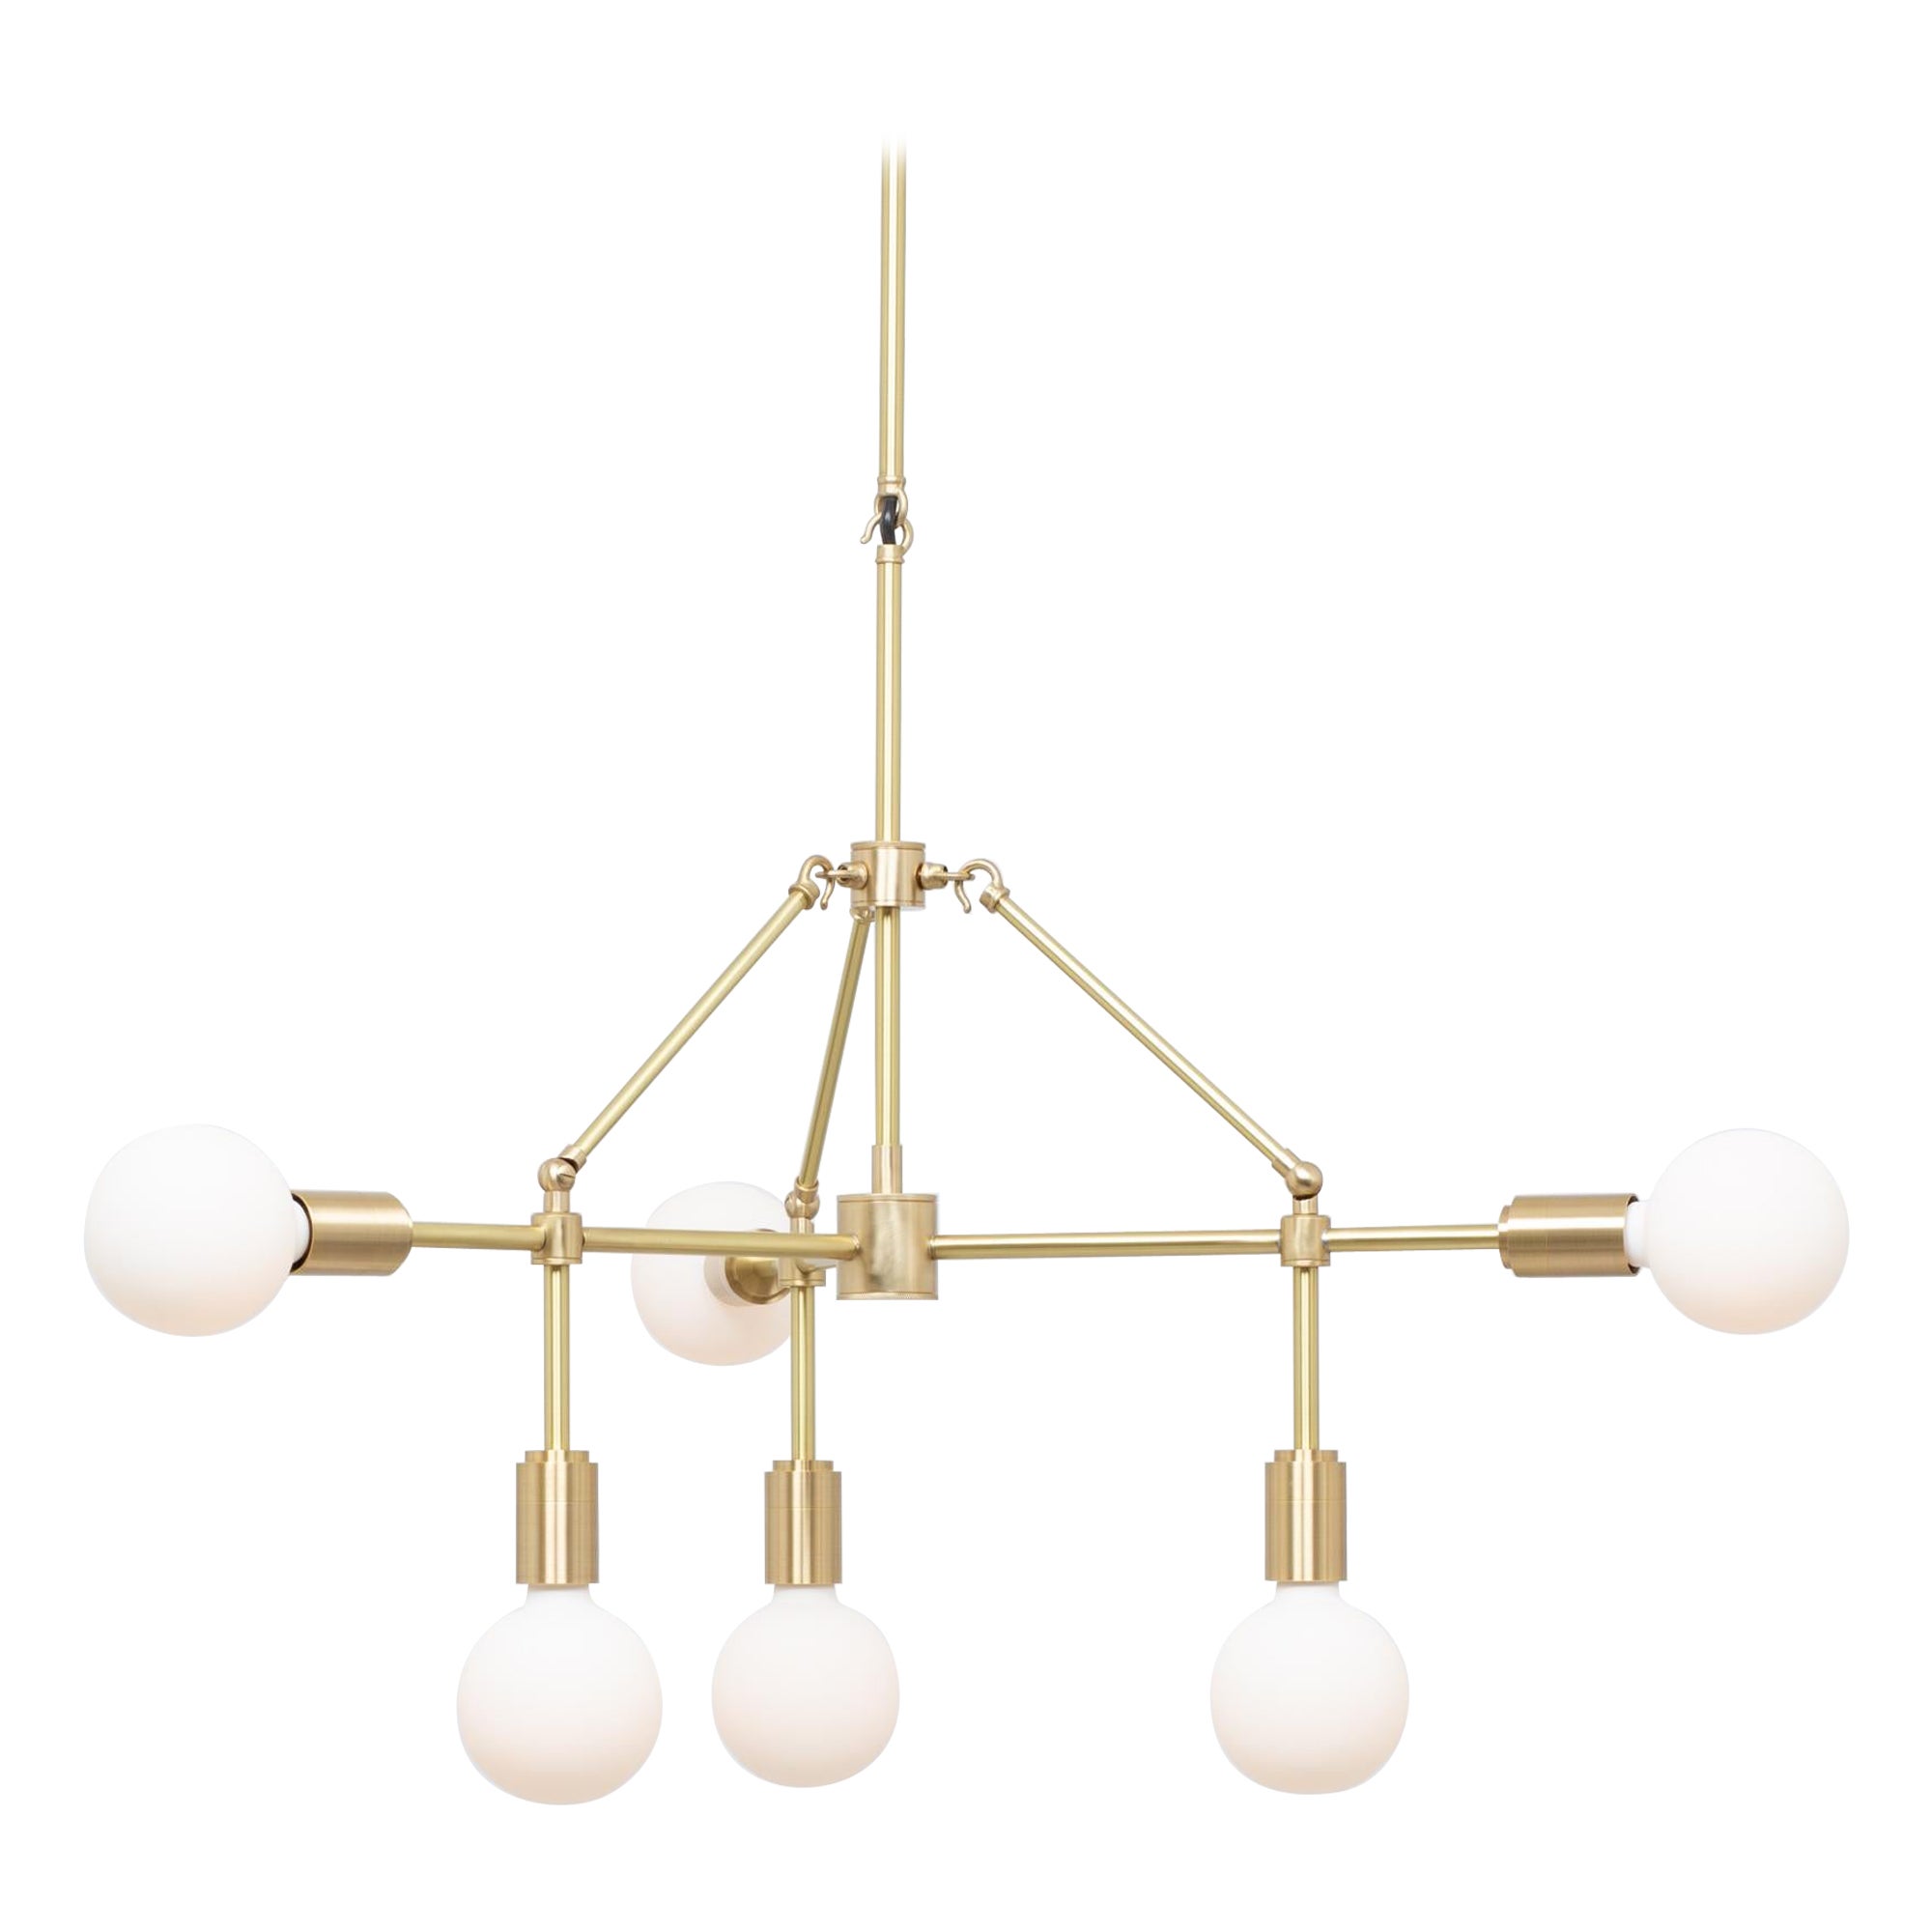 Three Arm Six Sphere Chandelier by Lights of London